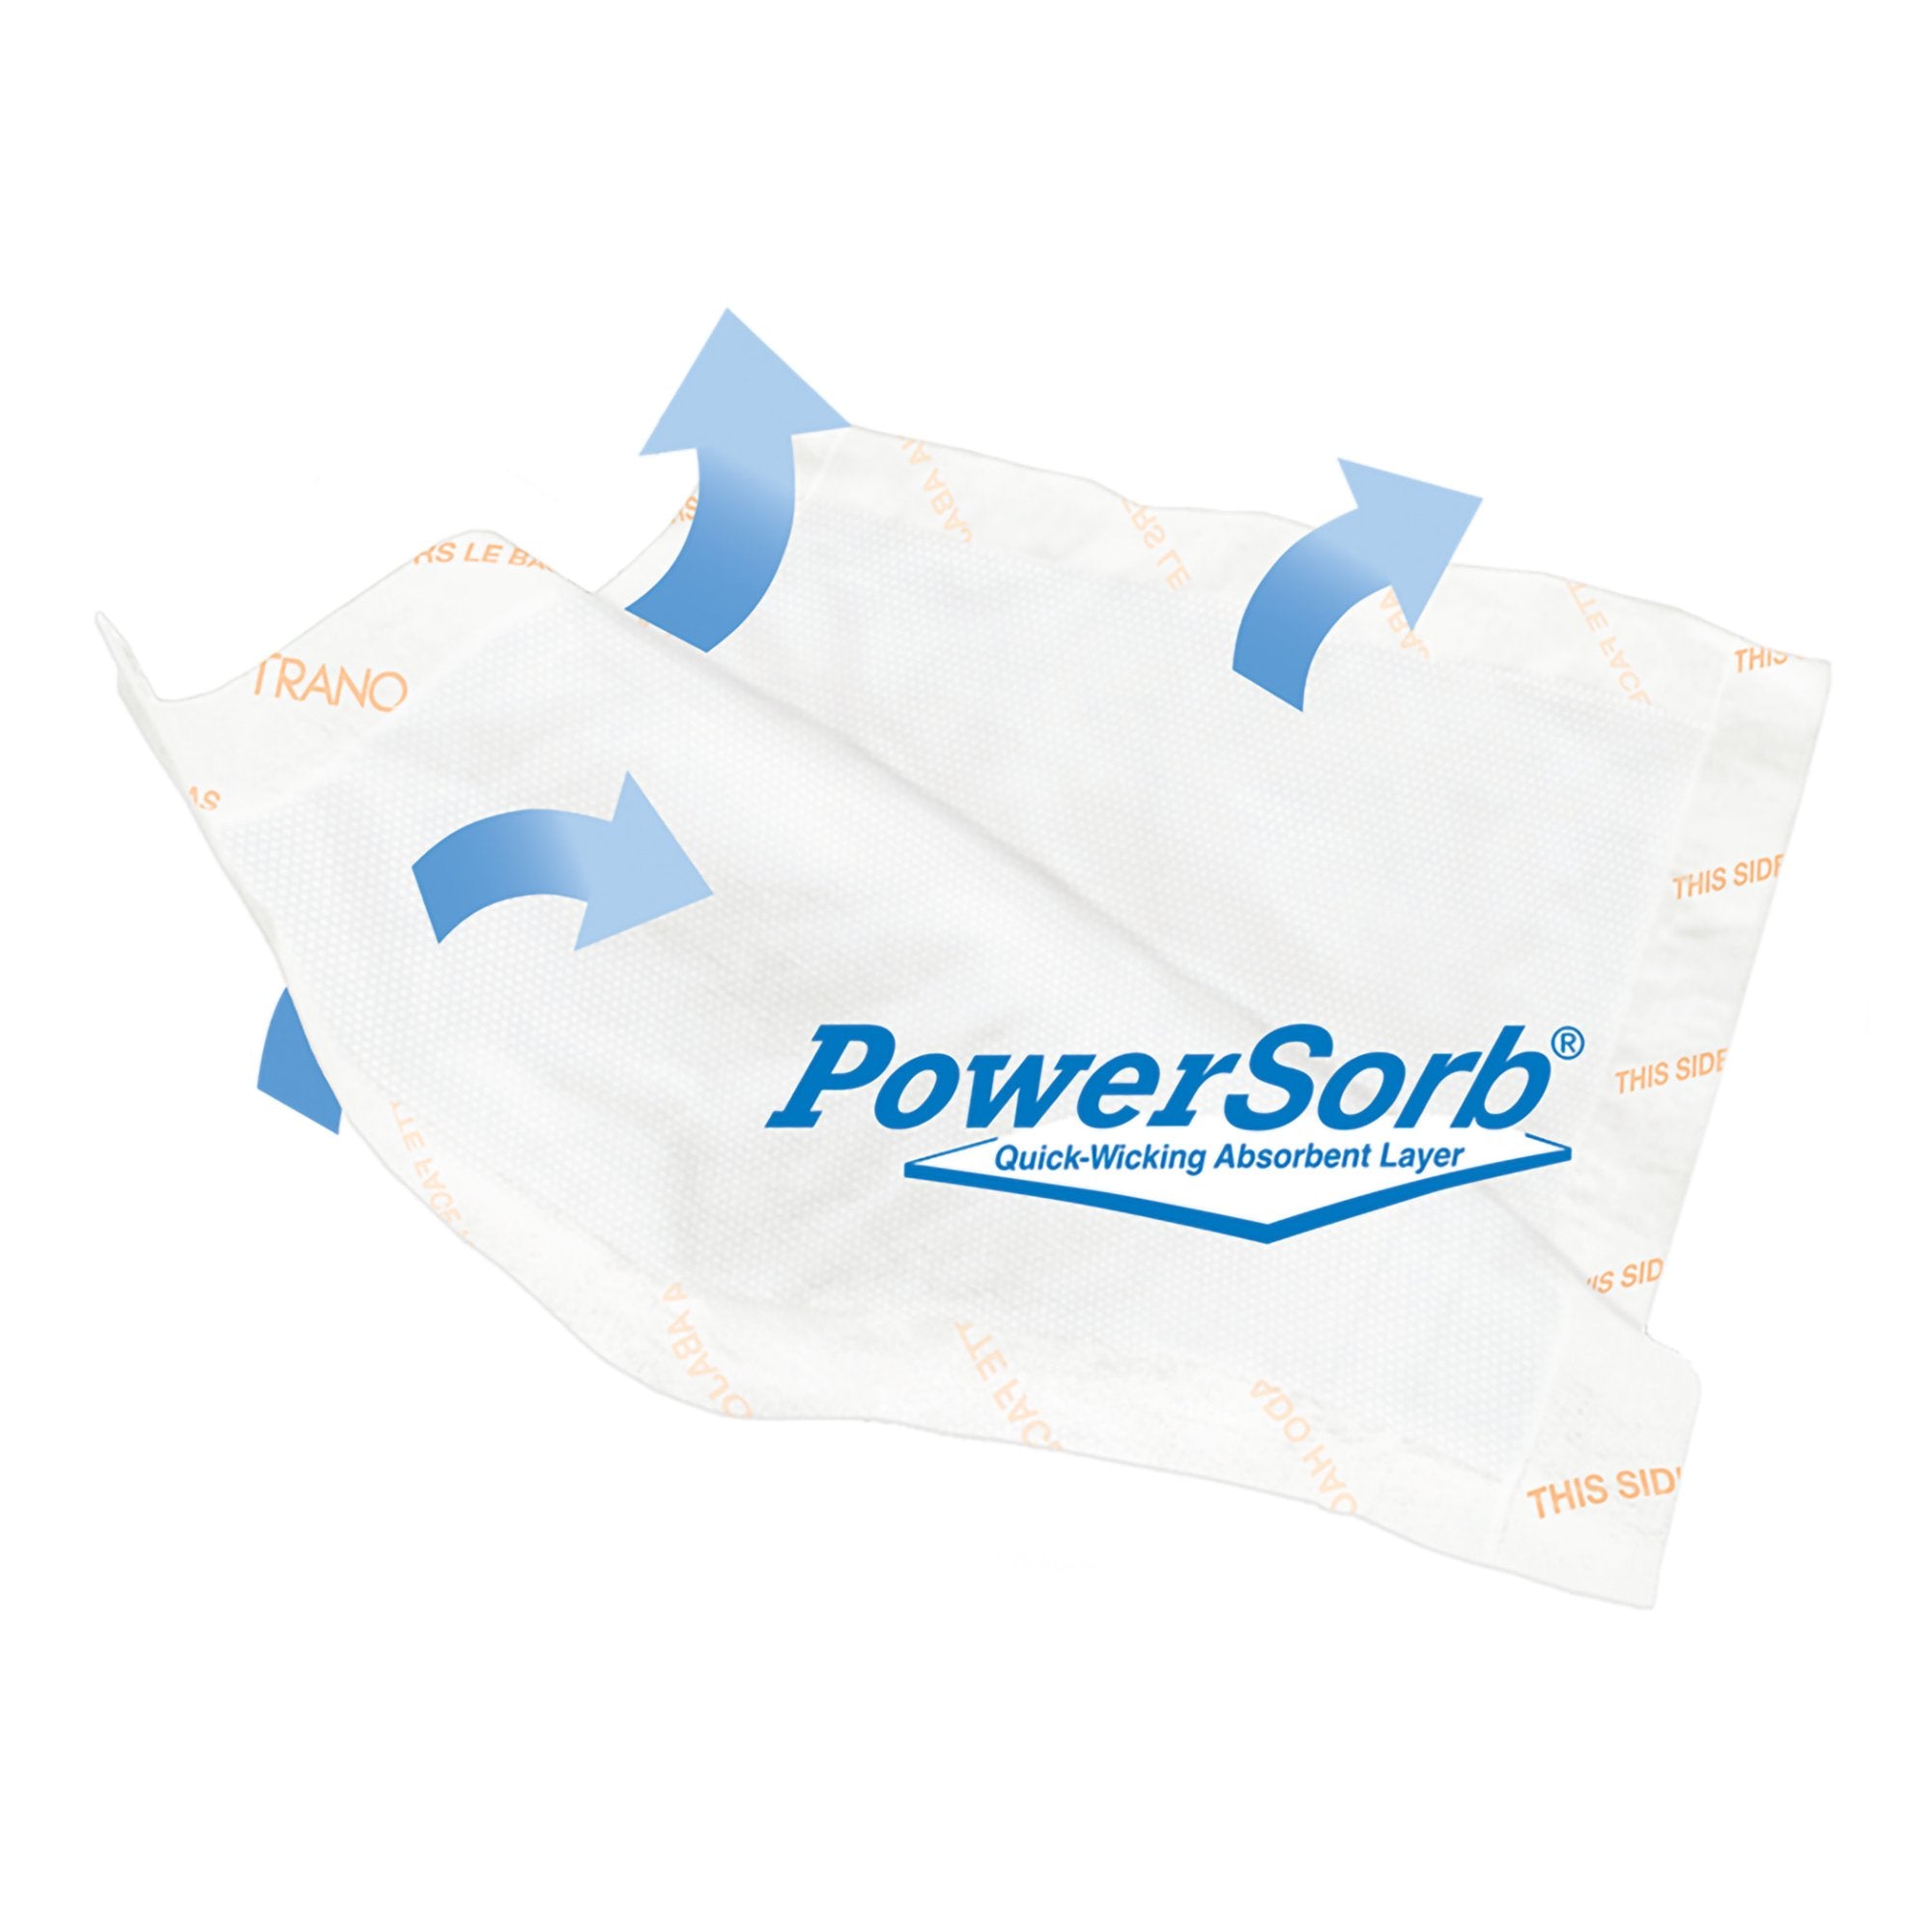 Disposable Underpad Tranquility® AIR-Plus™ 30 X 36 Inch Powersorb® Material Heavy Absorbency